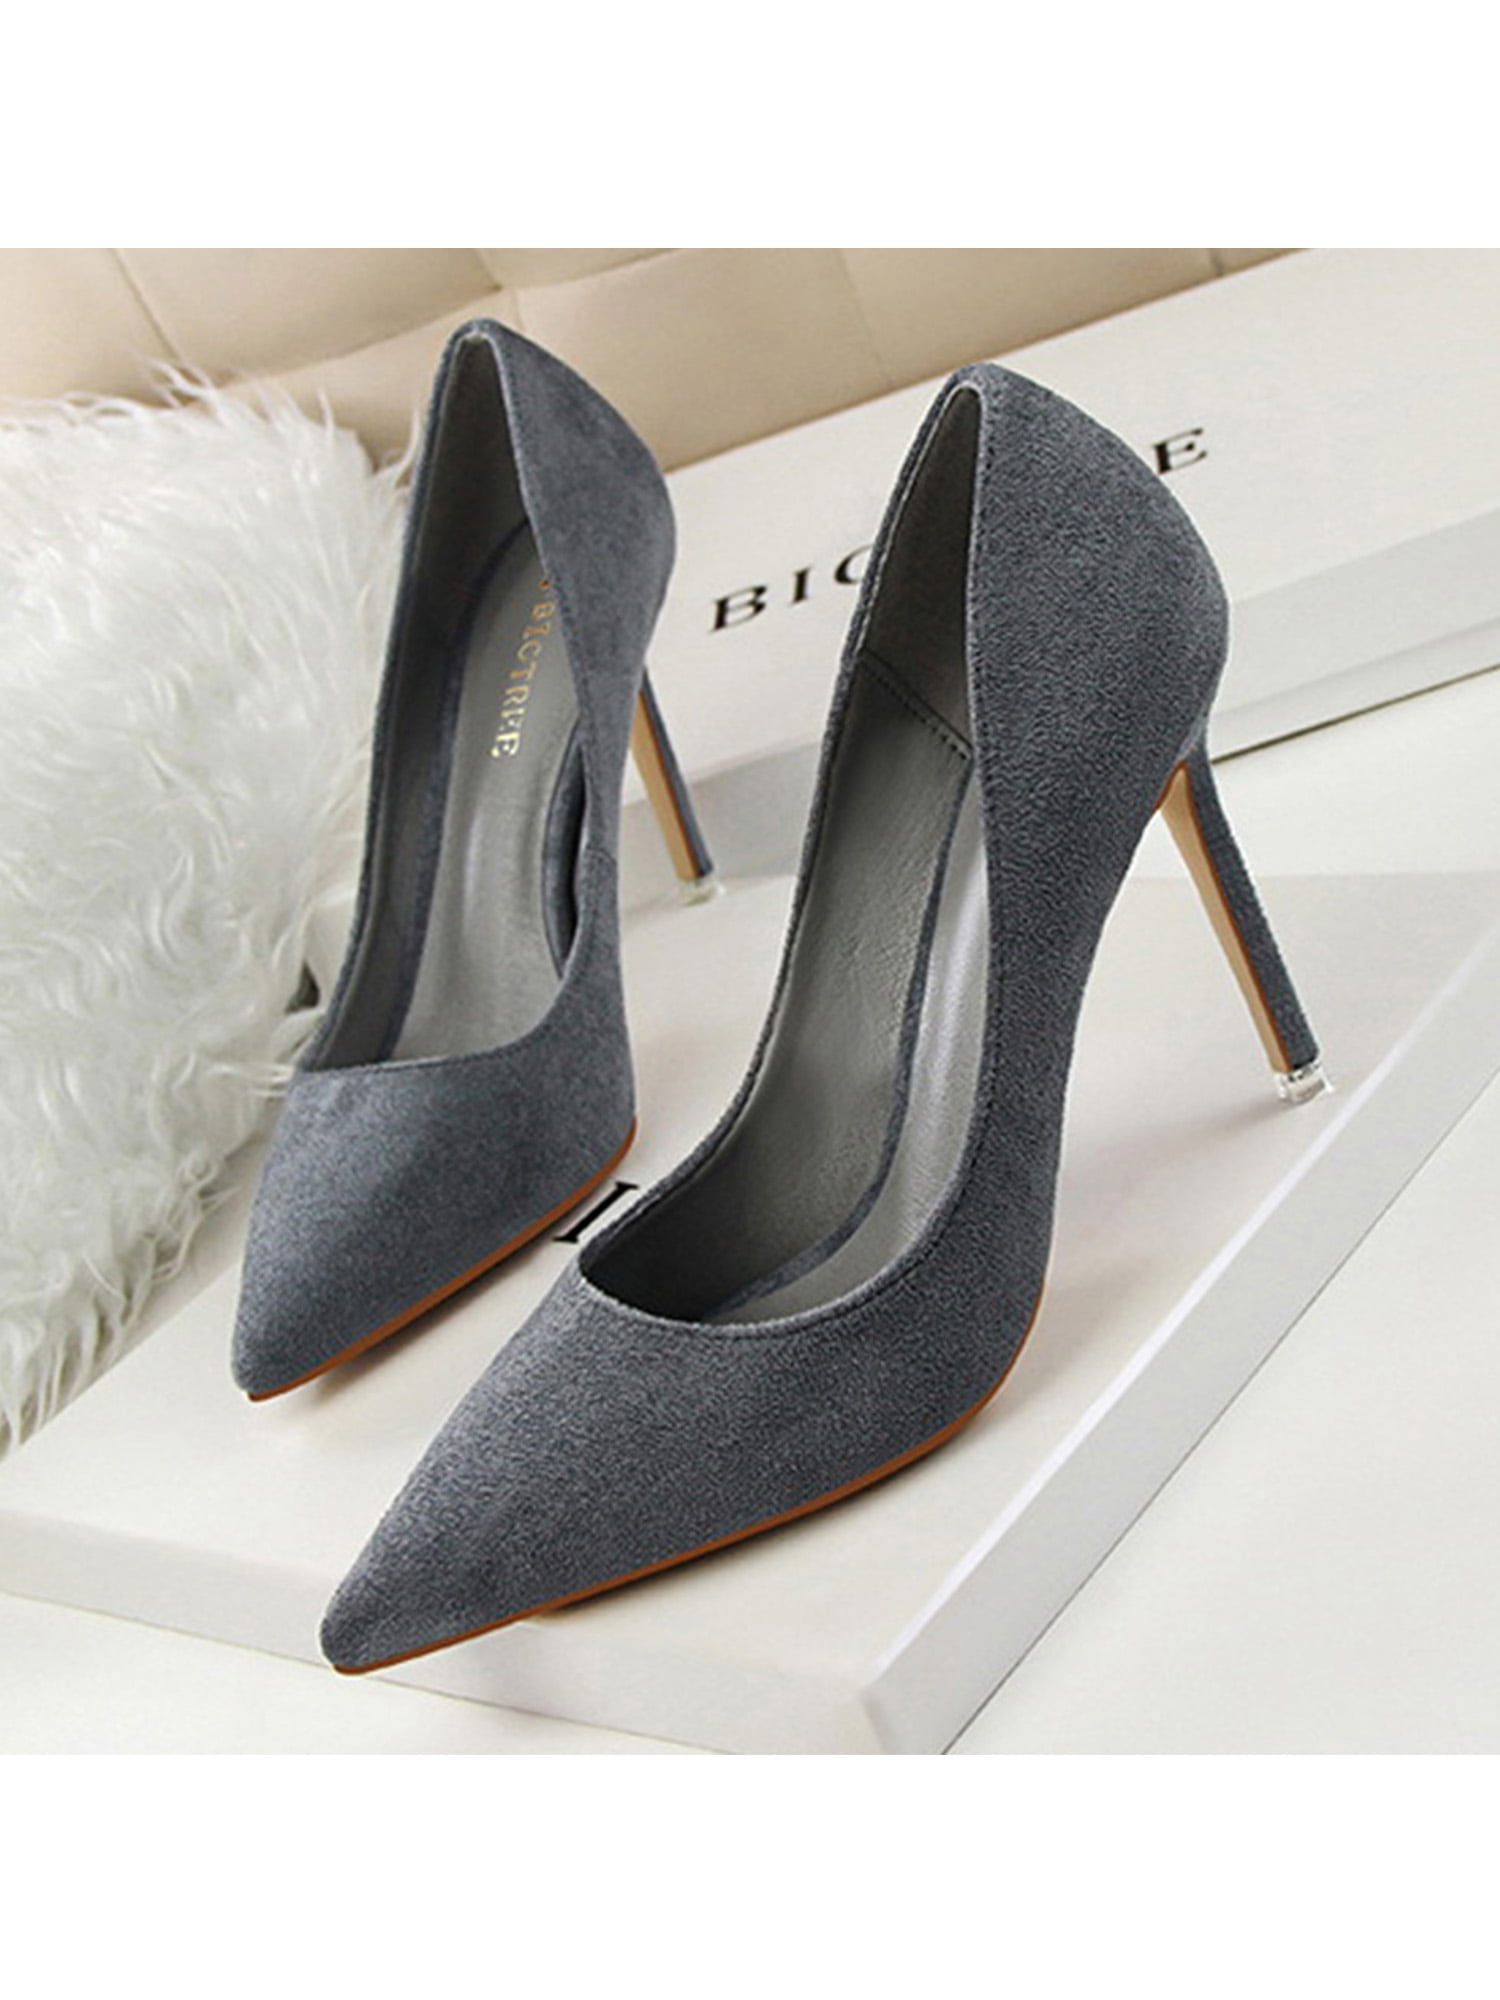 New High Heels Women Fashion Pointed Toe Office Shoes - China Walking Style  Shoe and Casual Shoes price | Made-in-China.com